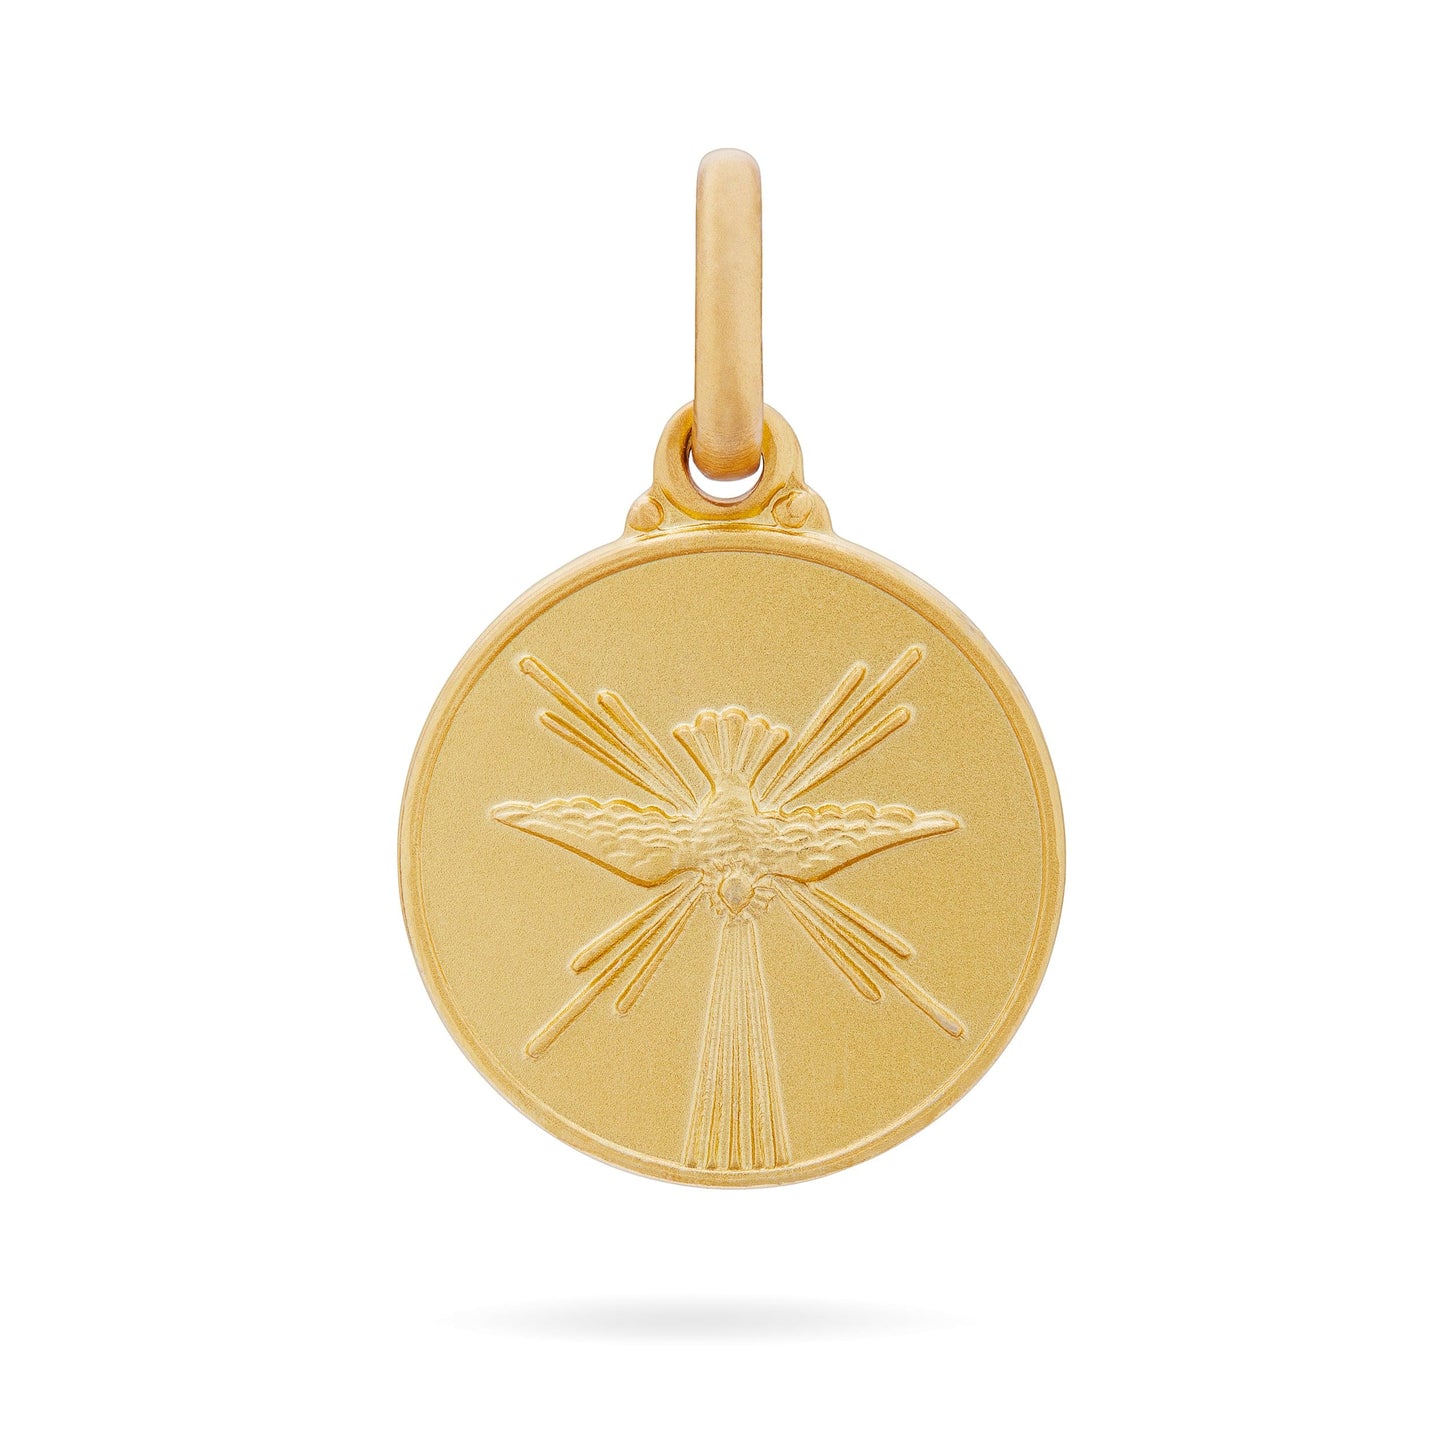 MONDO CATTOLICO Jewelry Holy Spirit Gold Medal